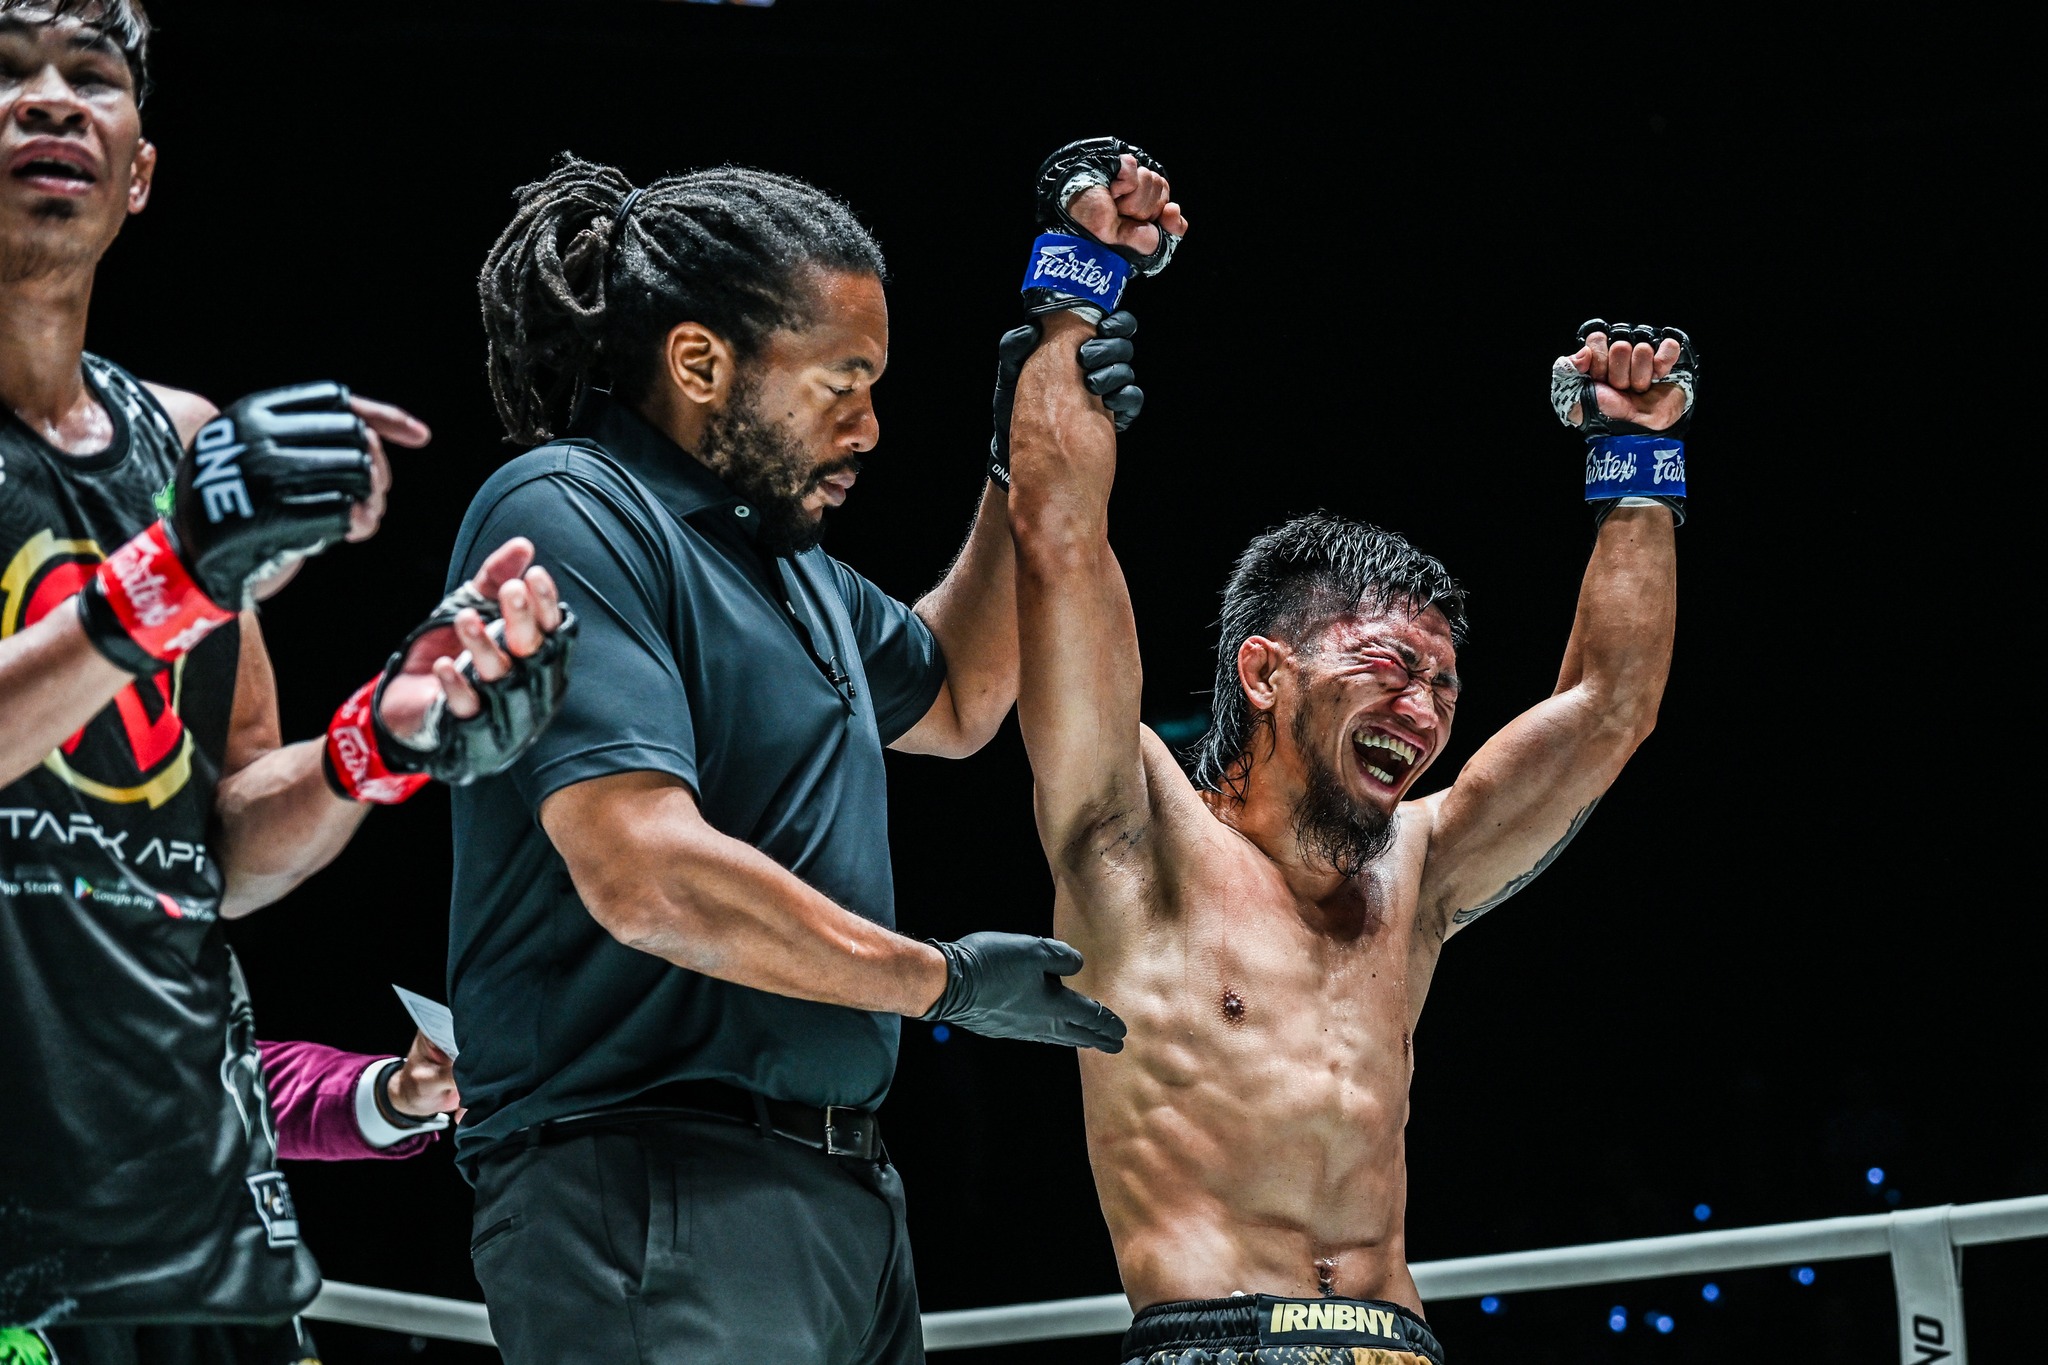 Adiwang gets his revenge with UD win over Miado